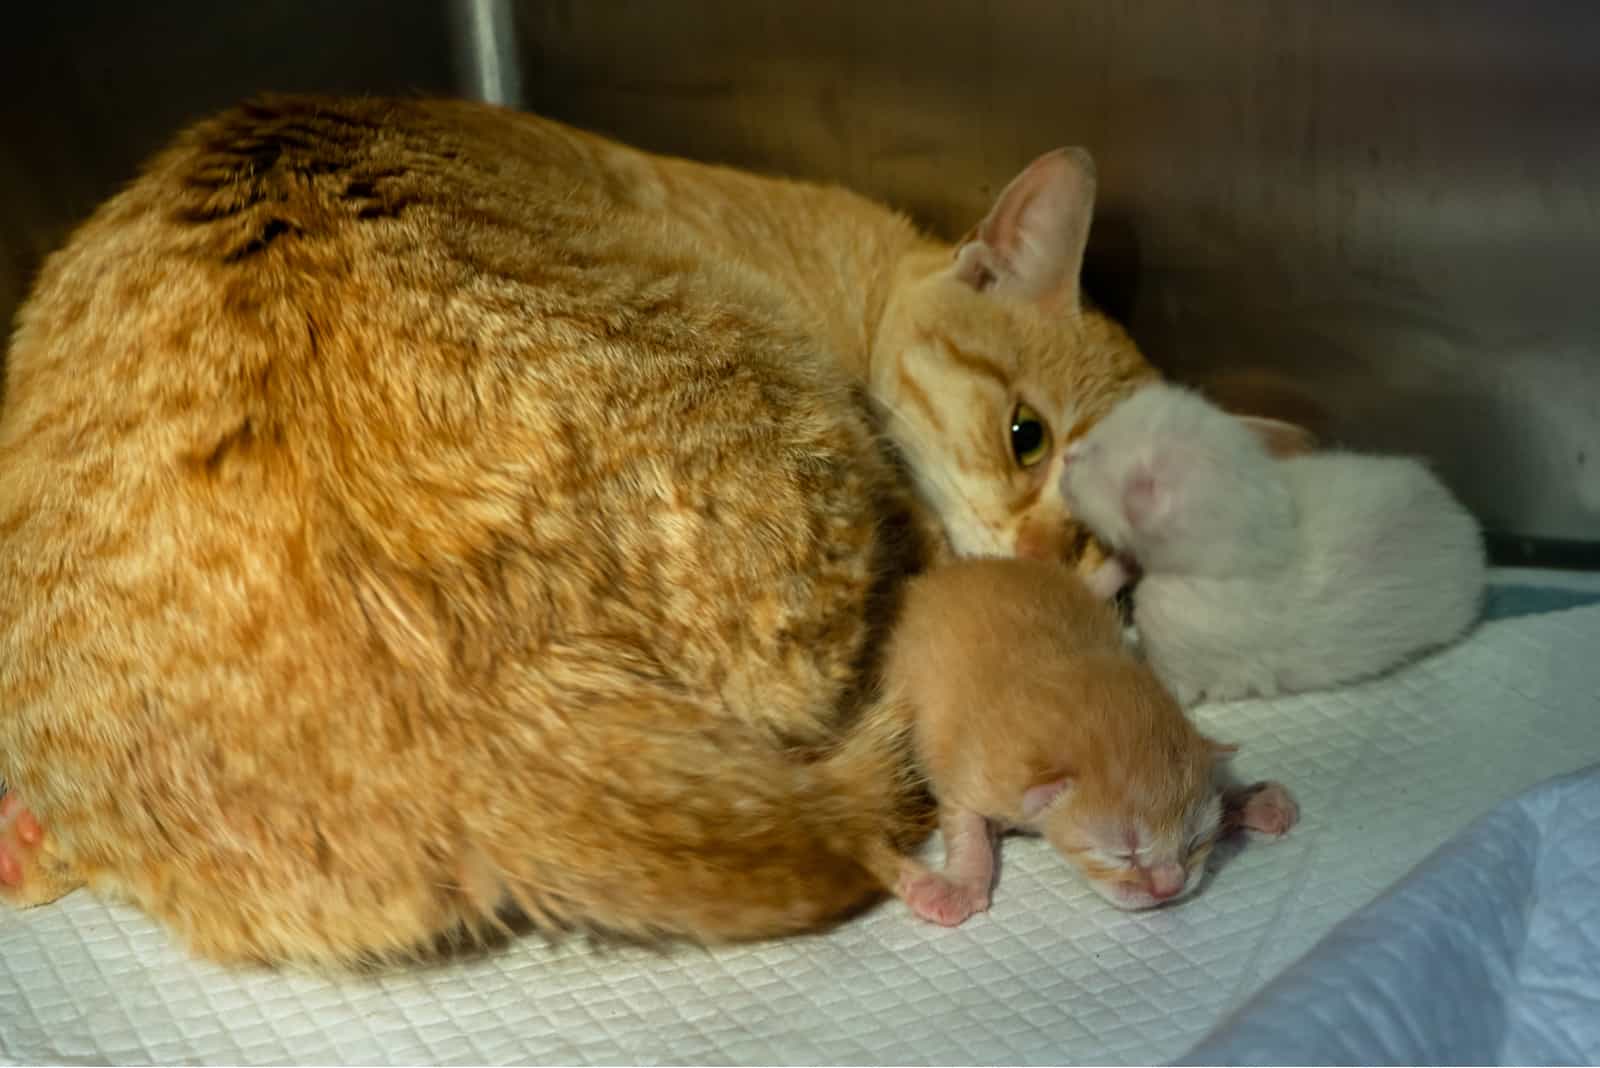 mother cat laying with her newborn kitten